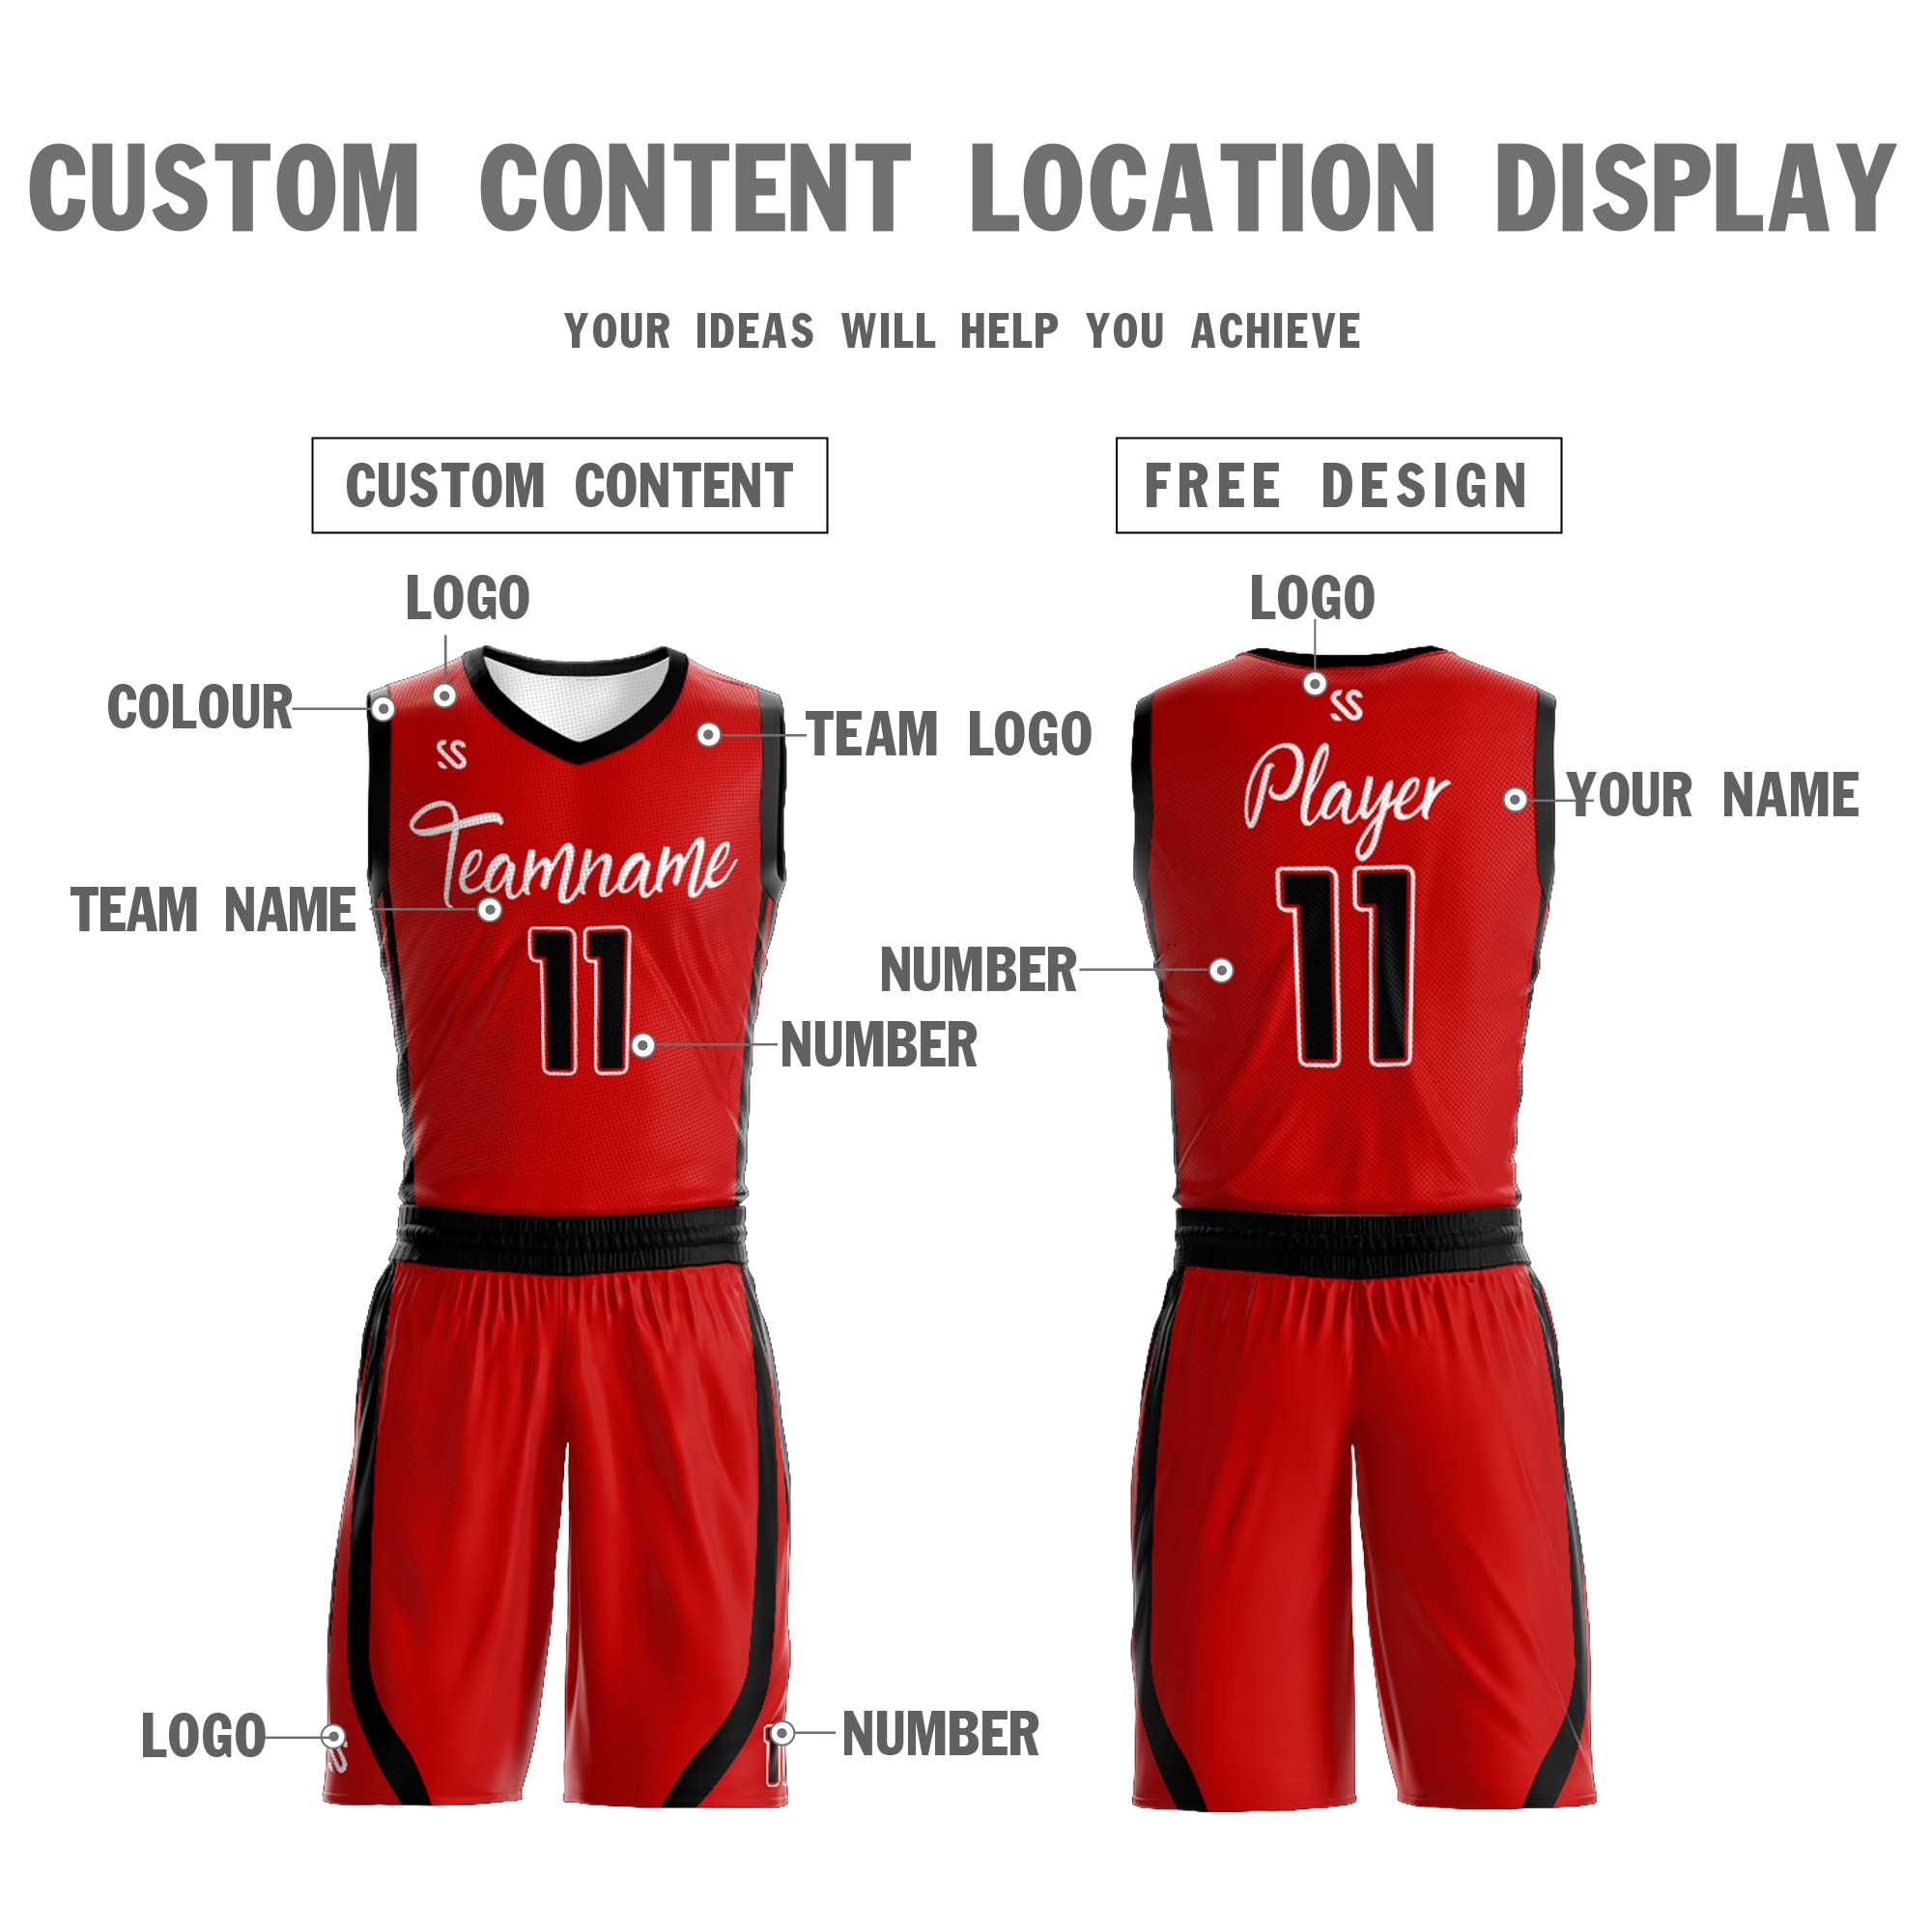 custom red and white reversible basketball uniforms custom content location display